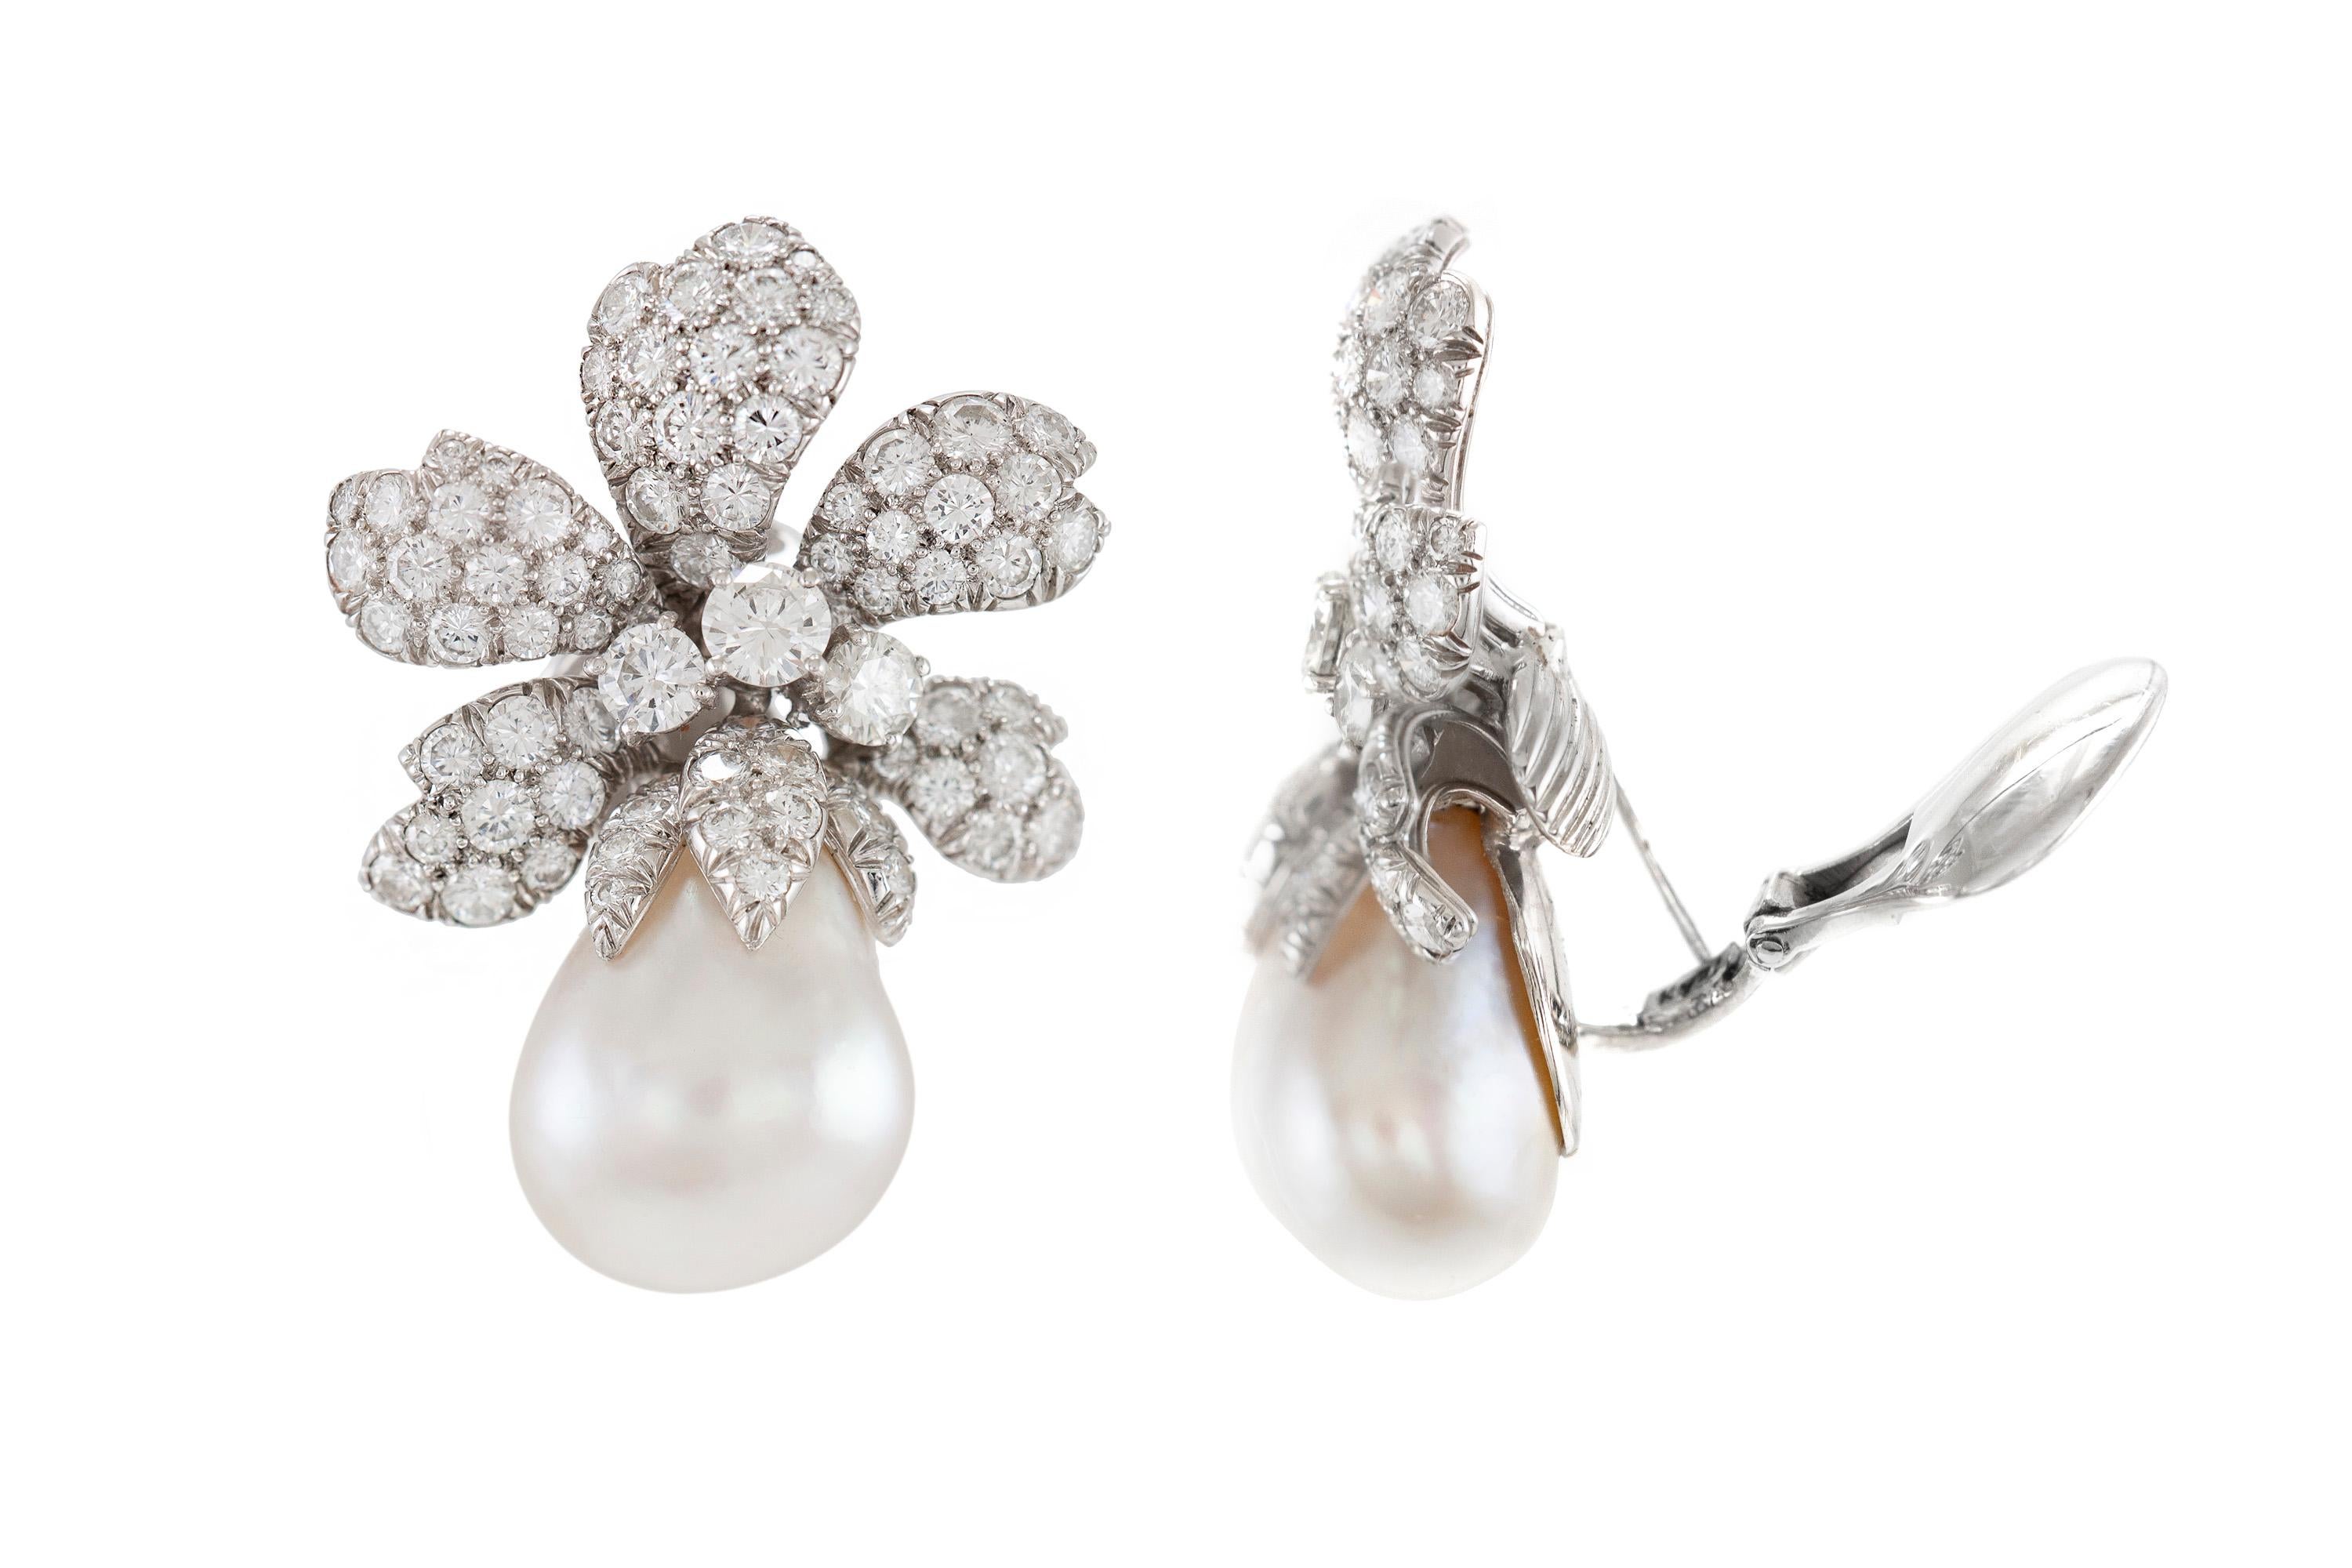 Finely crafted in platinum with South Sea Pearls and round brilliant cut diamonds weighing a total of 11.73 carats.
The earrings are 1 3/4 inch long, 1 1/8 inch wide.
The size of the pearls are approximately 22 mm x 16.5 mm
Signed by David